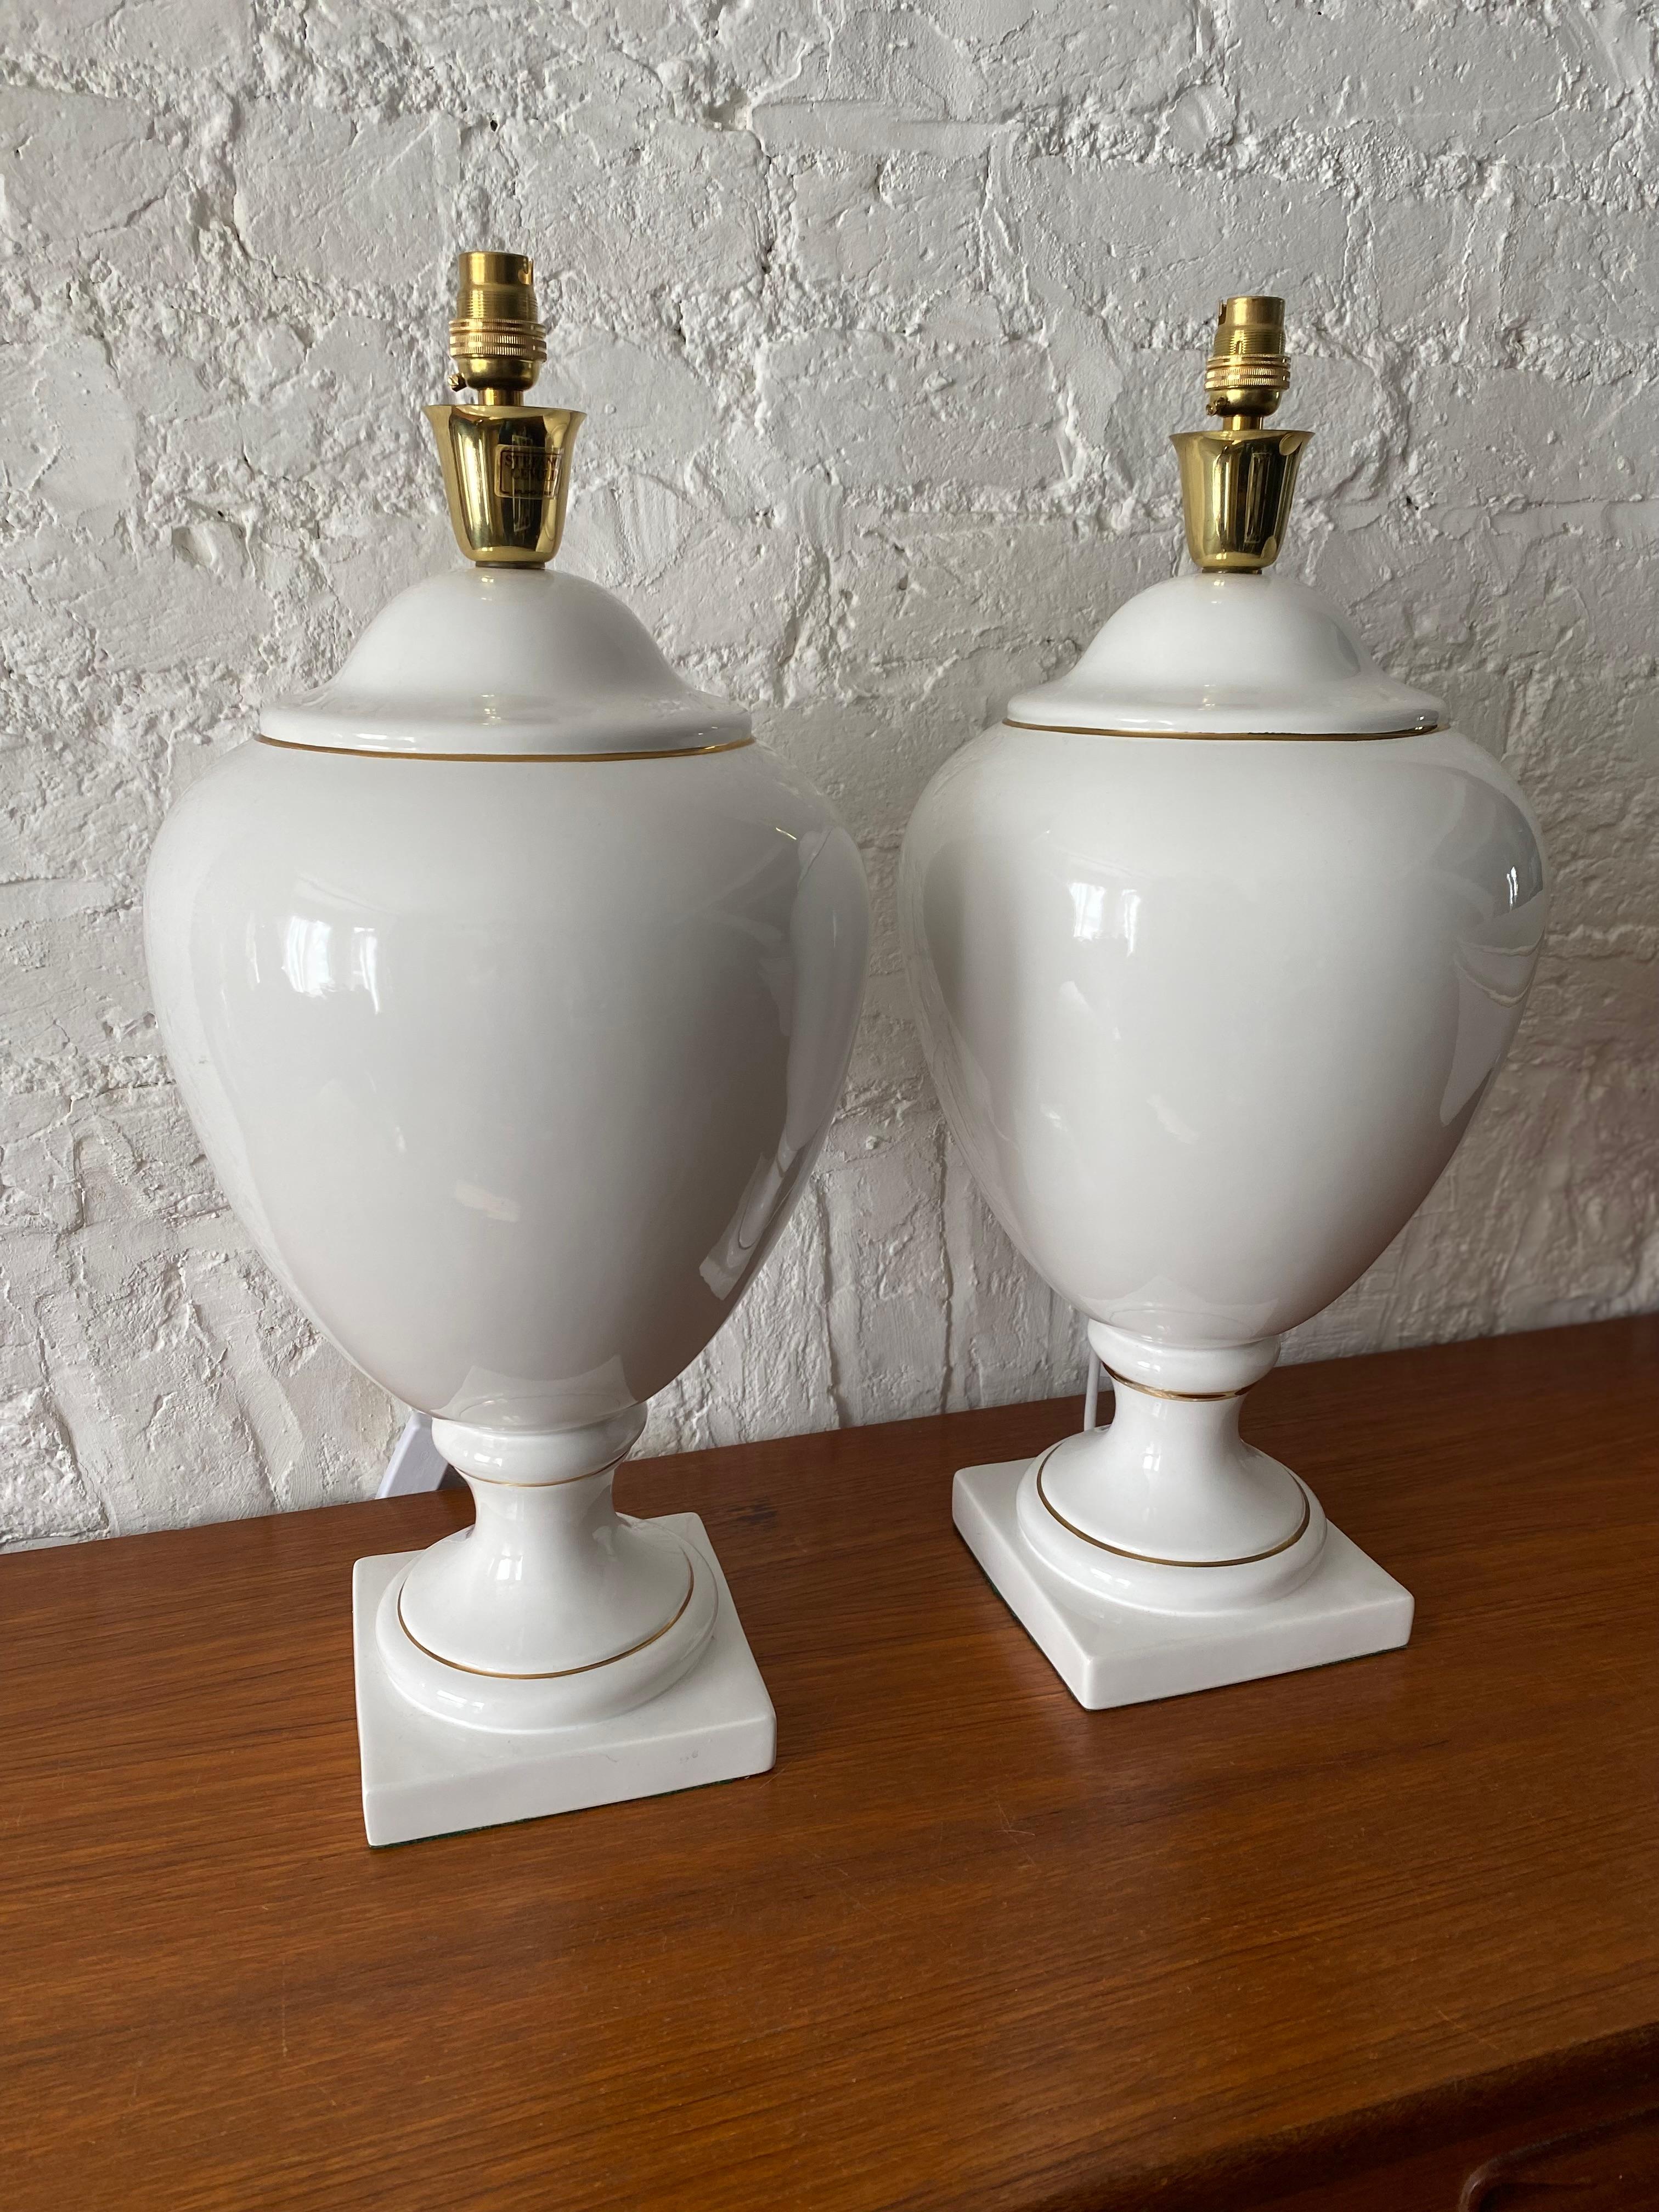 Italian Pair of White & Gold Ceramic Table Lamps & Shades by Stefano Cevoli, 1980s For Sale